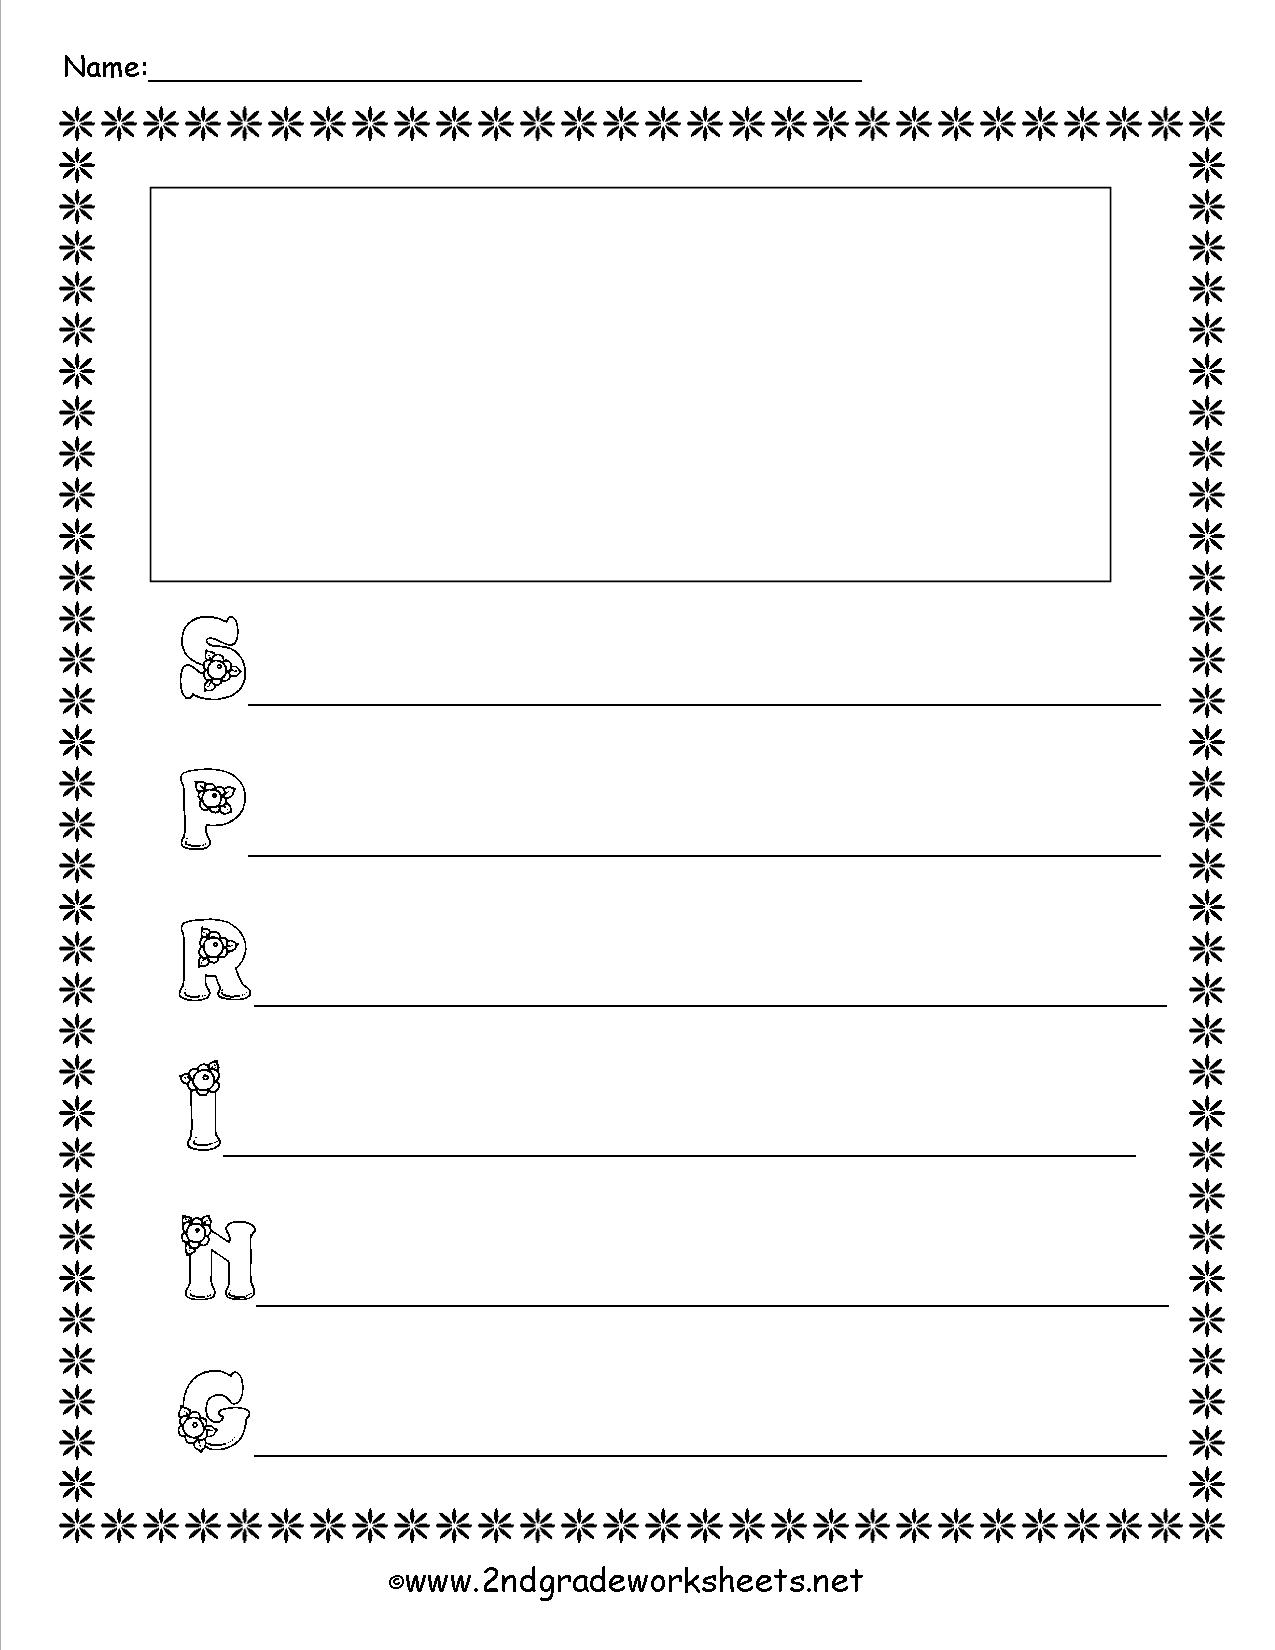 Acrostic Poem Forms Templates And Worksheets Spring acrostic poem template printable